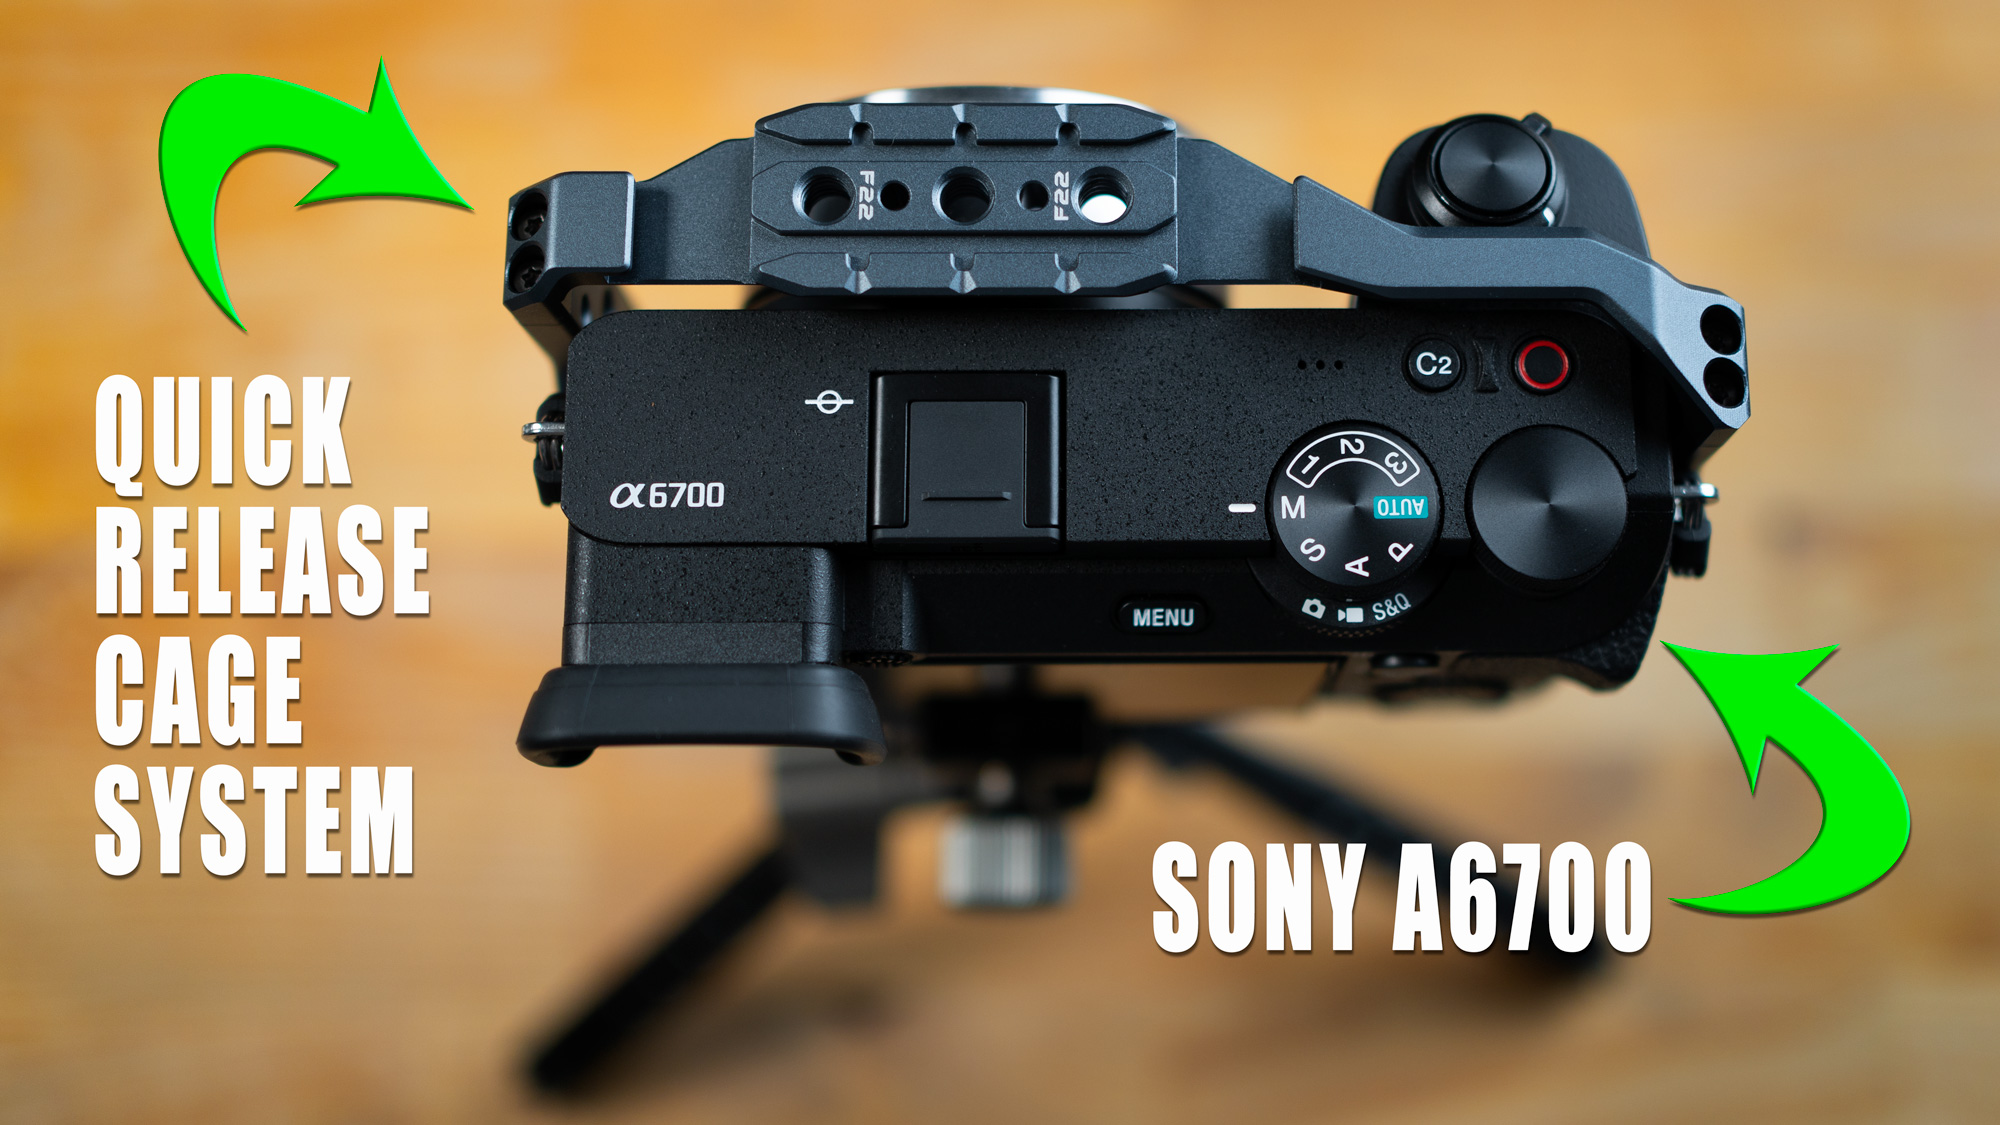 Falcam Quick Release Cage System Review | Sony A6700 Build